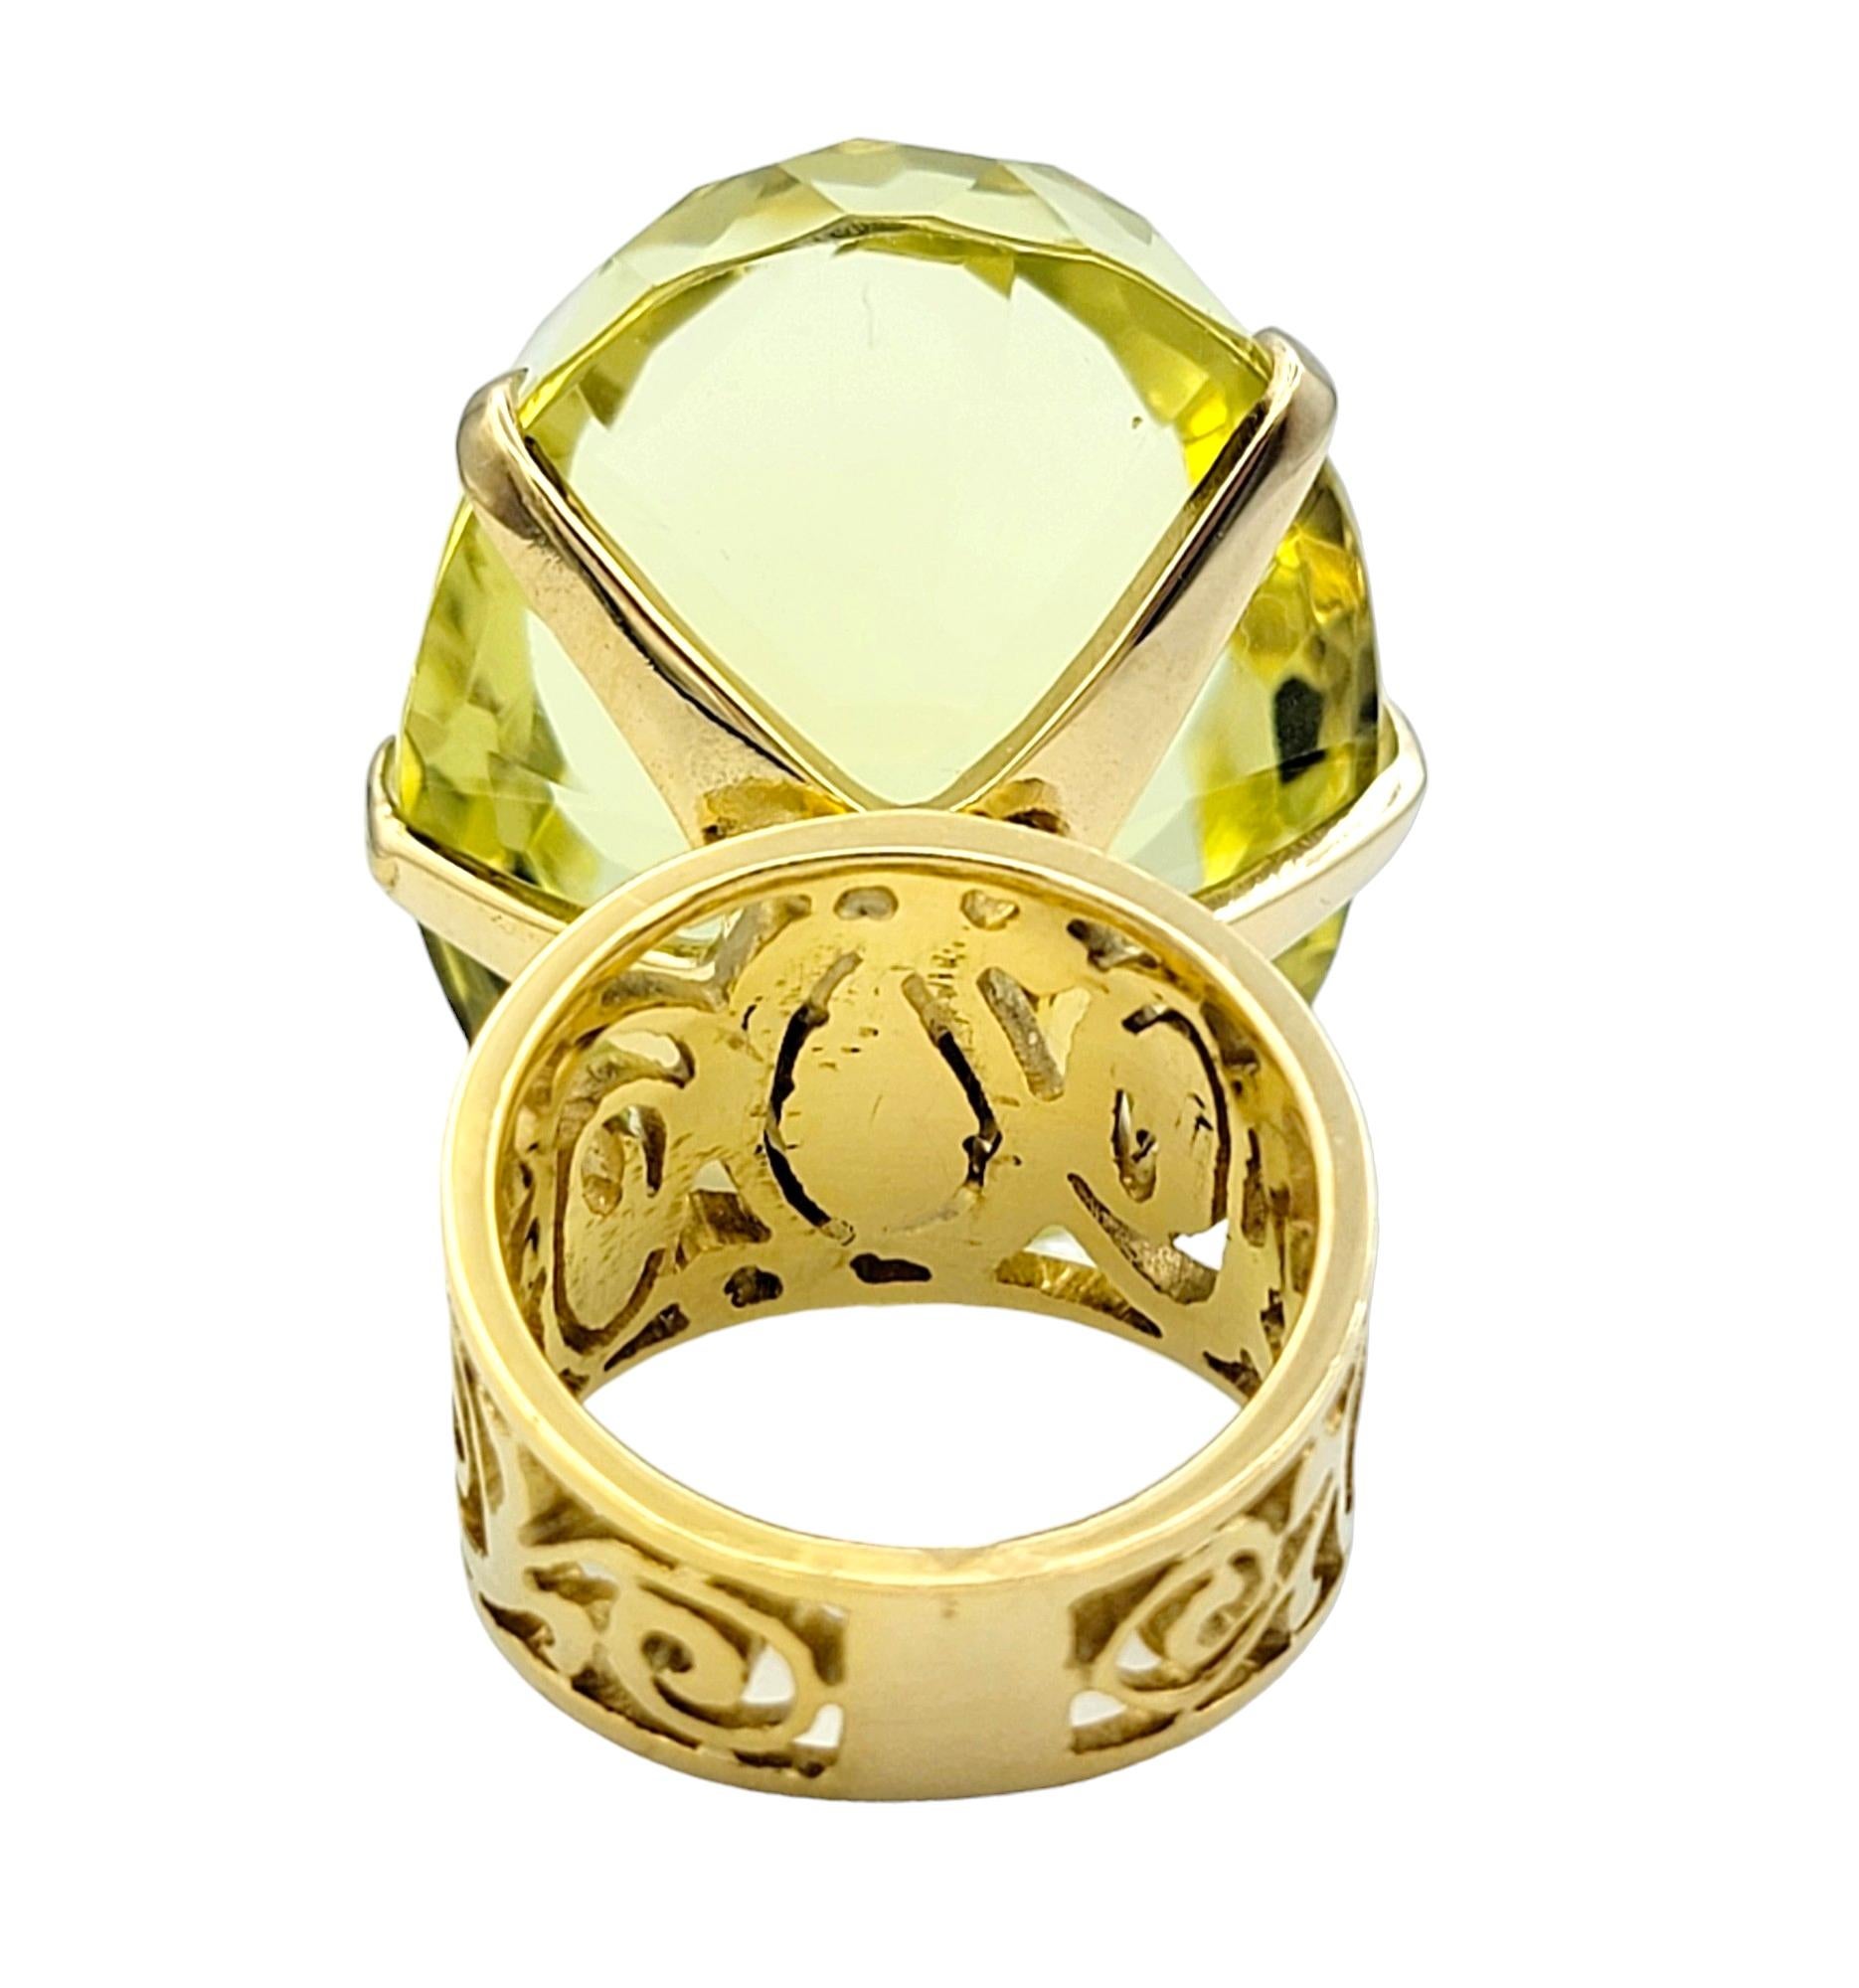 77.08 Carat Oval Citrine High Profile Cocktail Ring Set in 14 Karat Yellow Gold For Sale 1